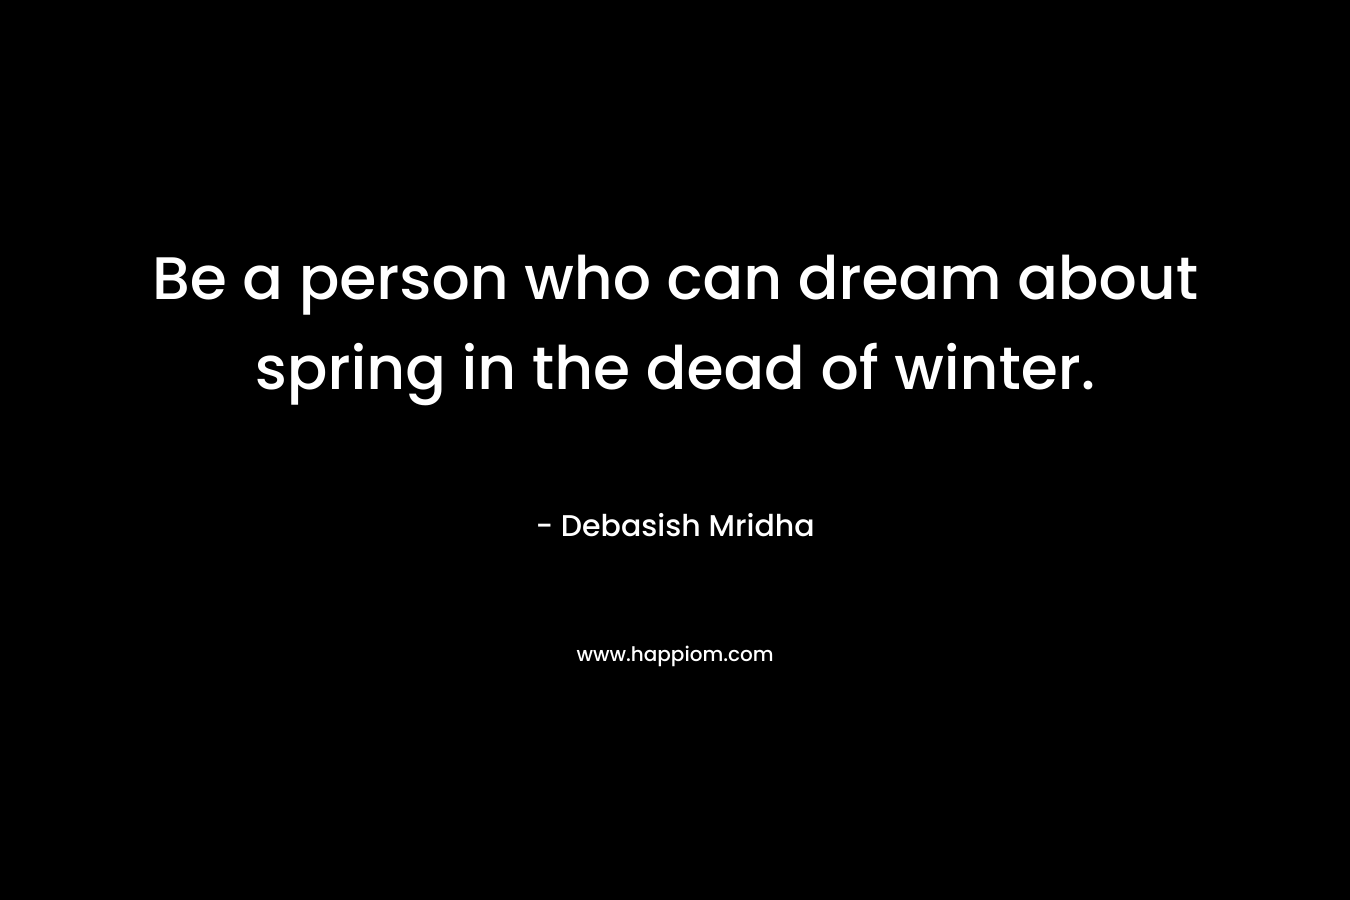 Be a person who can dream about spring in the dead of winter.